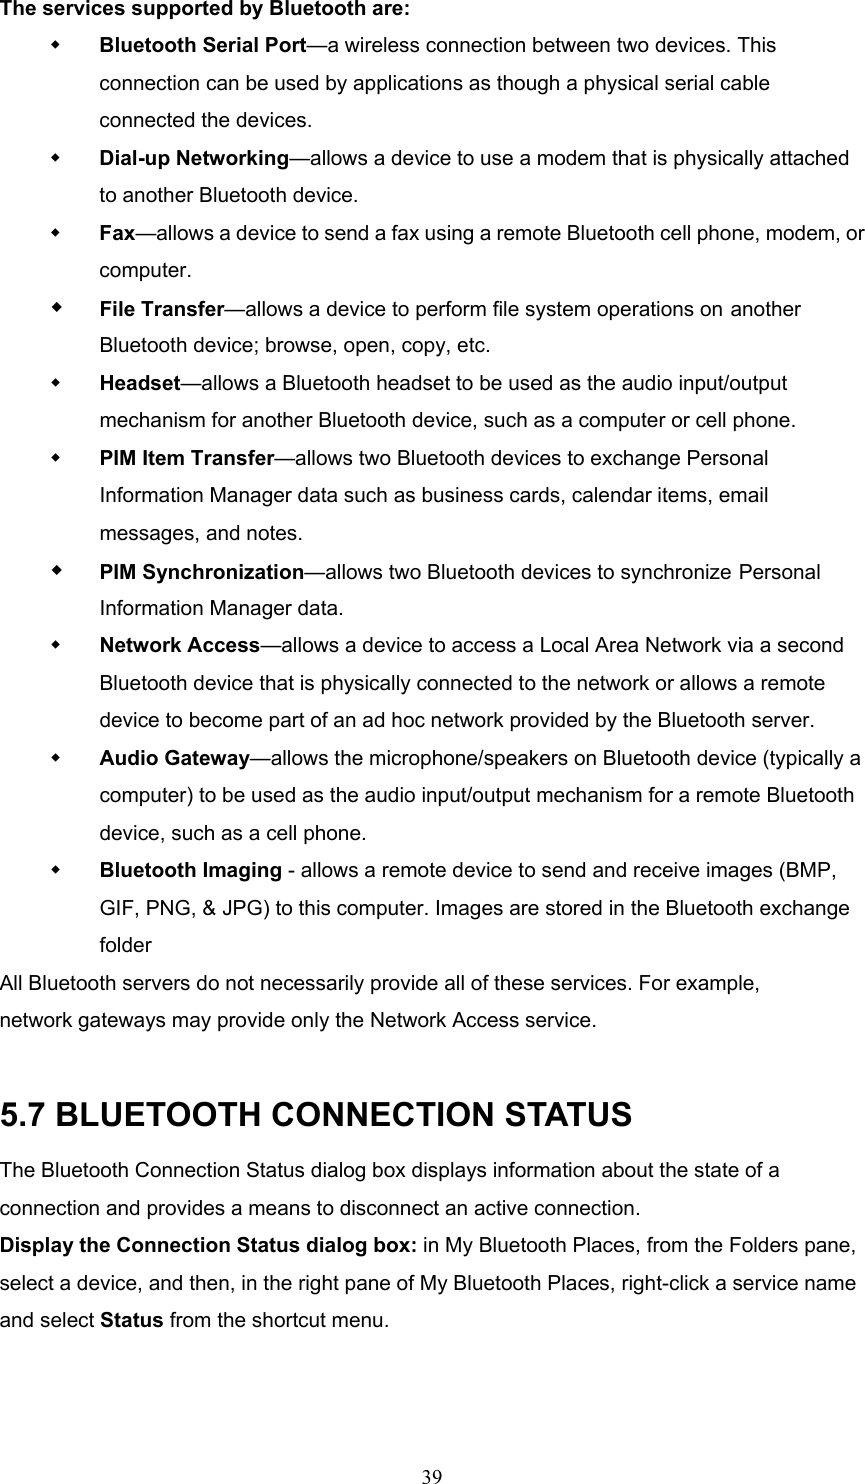  39 The services supported by Bluetooth are:   Bluetooth Serial Port—a wireless connection between two devices. This connection can be used by applications as though a physical serial cable connected the devices.   Dial-up Networking—allows a device to use a modem that is physically attached to another Bluetooth device.   Fax—allows a device to send a fax using a remote Bluetooth cell phone, modem, or computer.   File Transfer—allows a device to perform file system operations on another Bluetooth device; browse, open, copy, etc.   Headset—allows a Bluetooth headset to be used as the audio input/output mechanism for another Bluetooth device, such as a computer or cell phone.   PIM Item Transfer—allows two Bluetooth devices to exchange Personal Information Manager data such as business cards, calendar items, email messages, and notes.   PIM Synchronization—allows two Bluetooth devices to synchronize Personal Information Manager data.   Network Access—allows a device to access a Local Area Network via a second Bluetooth device that is physically connected to the network or allows a remote device to become part of an ad hoc network provided by the Bluetooth server.   Audio Gateway—allows the microphone/speakers on Bluetooth device (typically a computer) to be used as the audio input/output mechanism for a remote Bluetooth device, such as a cell phone.   Bluetooth Imaging - allows a remote device to send and receive images (BMP, GIF, PNG, &amp; JPG) to this computer. Images are stored in the Bluetooth exchange folder All Bluetooth servers do not necessarily provide all of these services. For example, network gateways may provide only the Network Access service.  5.7 BLUETOOTH CONNECTION STATUS The Bluetooth Connection Status dialog box displays information about the state of a connection and provides a means to disconnect an active connection. Display the Connection Status dialog box: in My Bluetooth Places, from the Folders pane, select a device, and then, in the right pane of My Bluetooth Places, right-click a service name and select Status from the shortcut menu. 